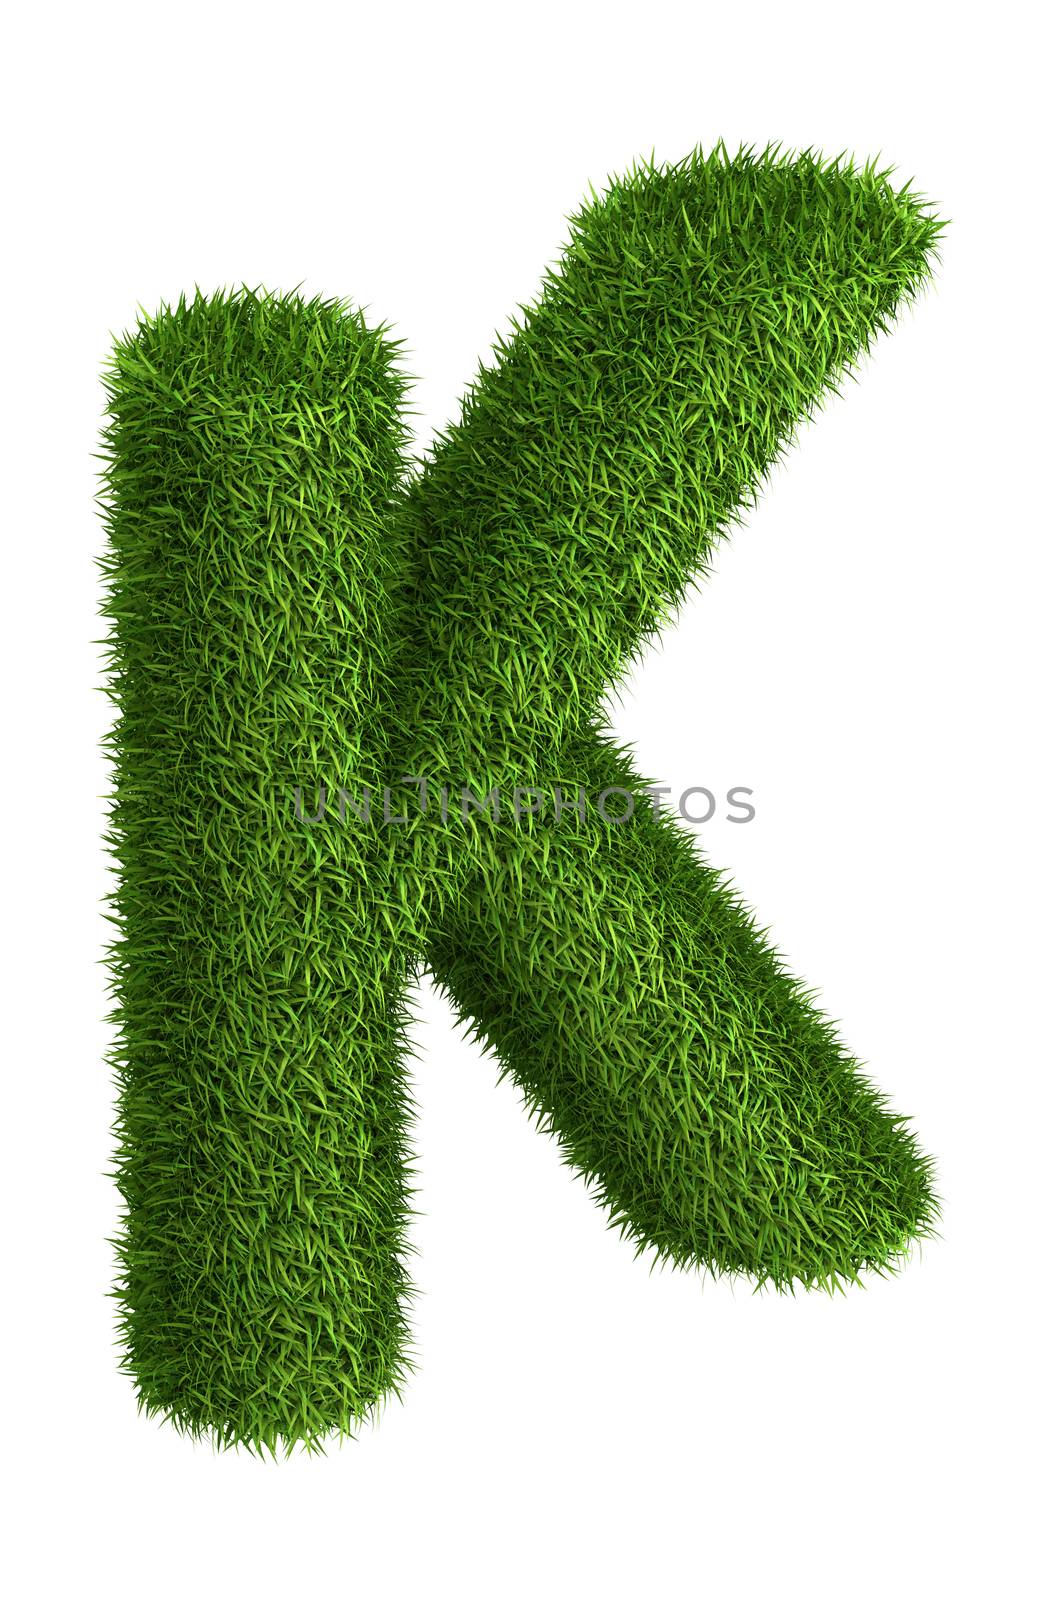 Natural grass letter K by iunewind